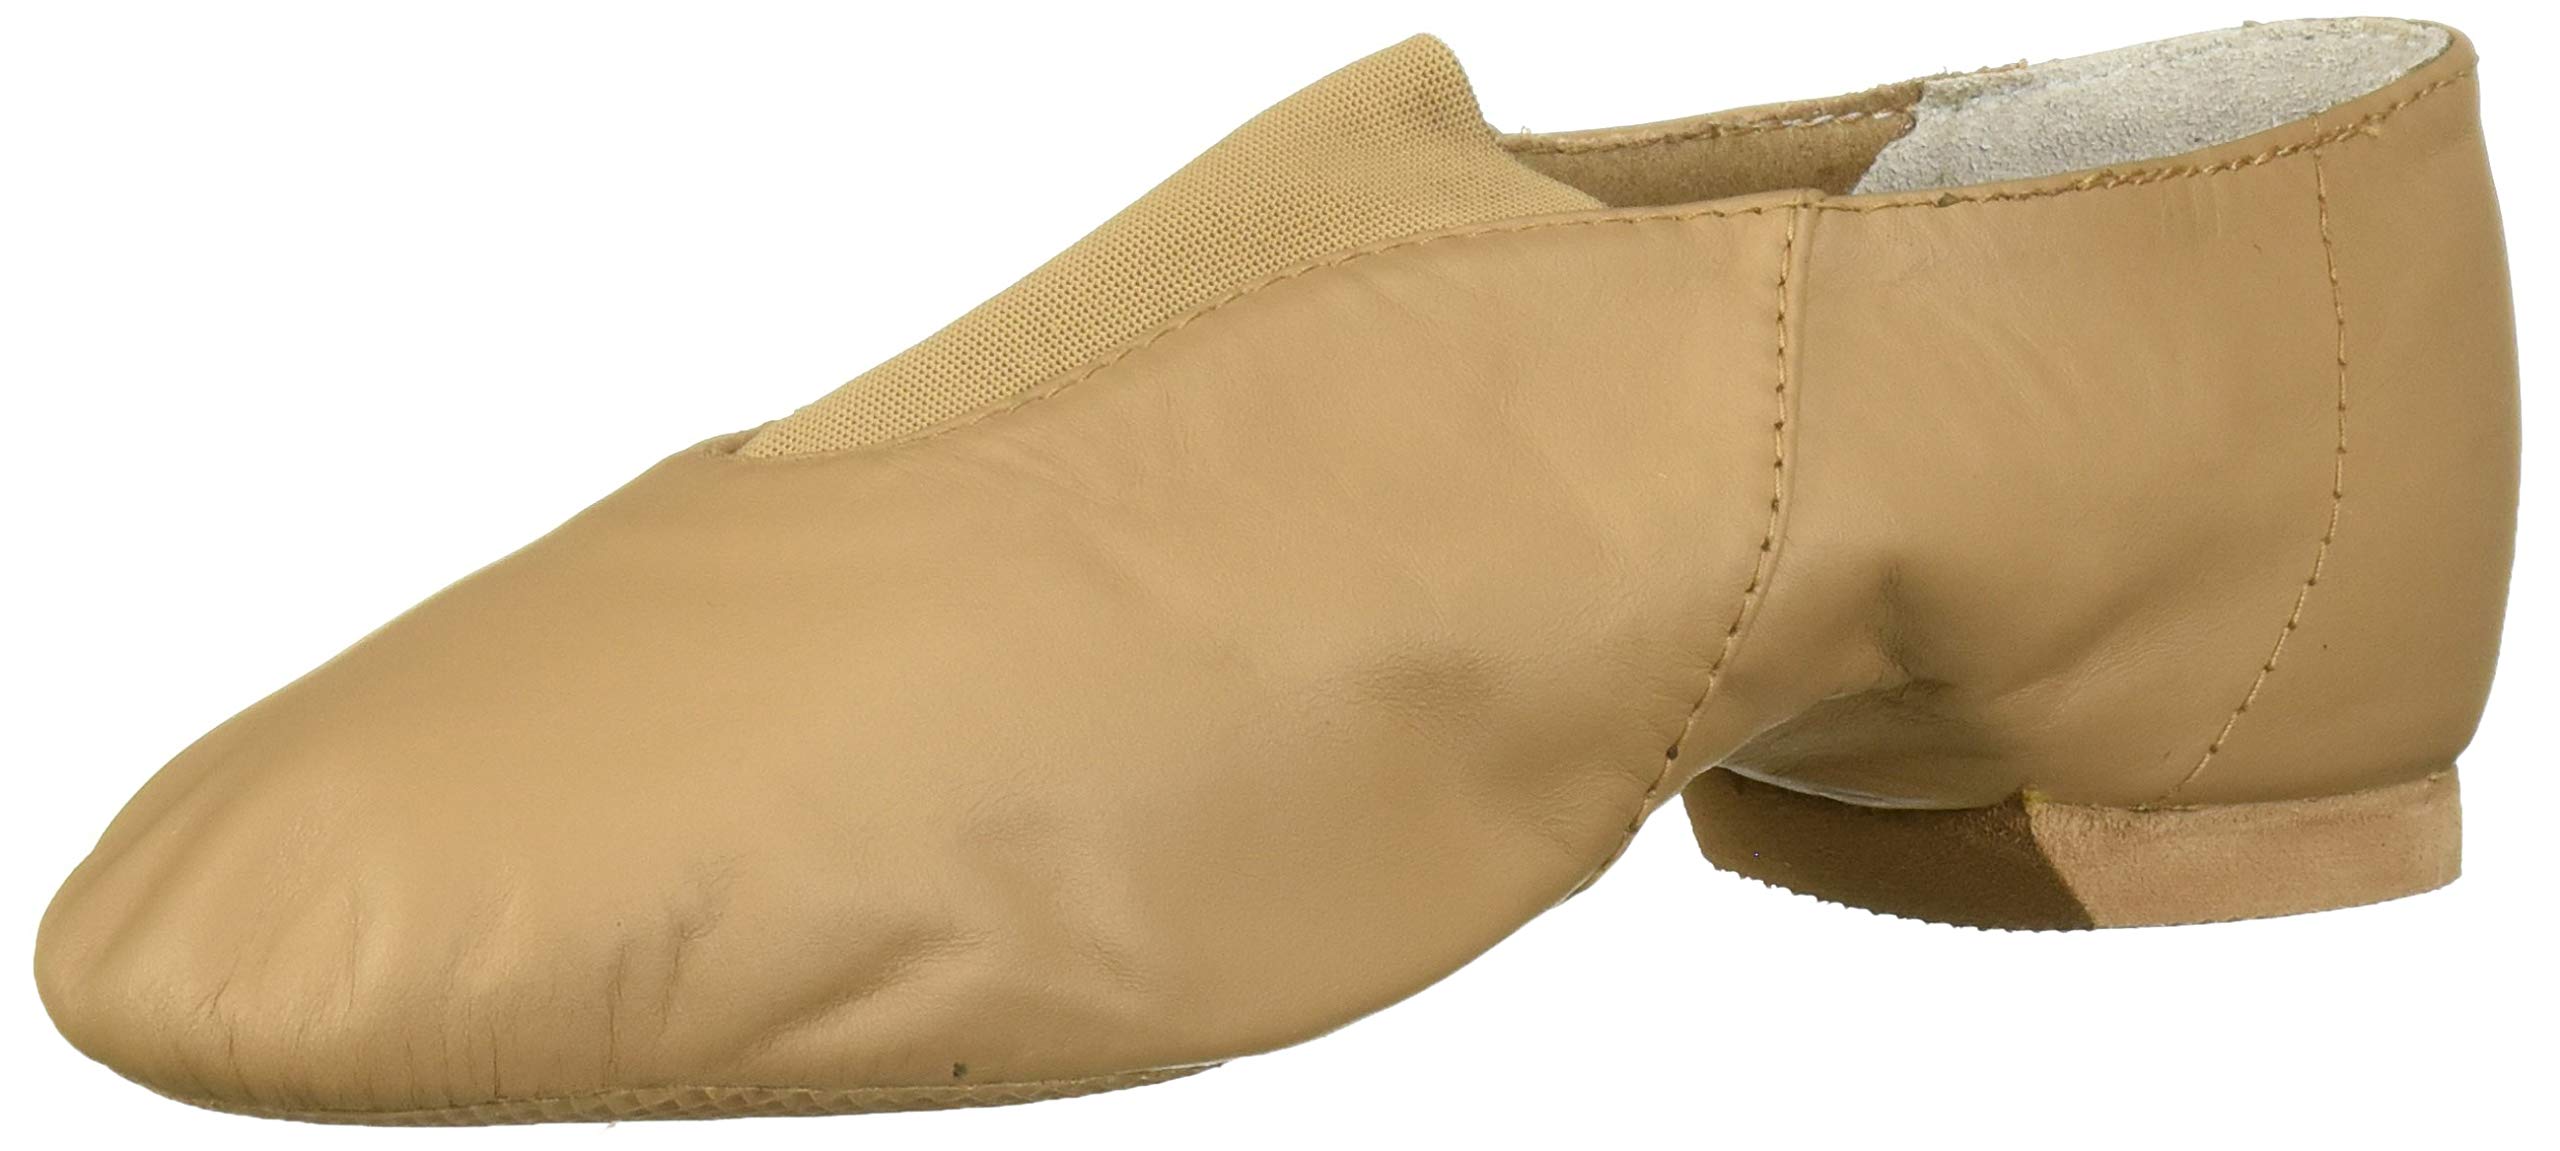 Bloch Dance Jazz Shoe for Girl's Bloch, Dance, Super Strong Elastic Slip On, High Durability, Superior Fit, Rubber Split Sole Leather, Flexibility